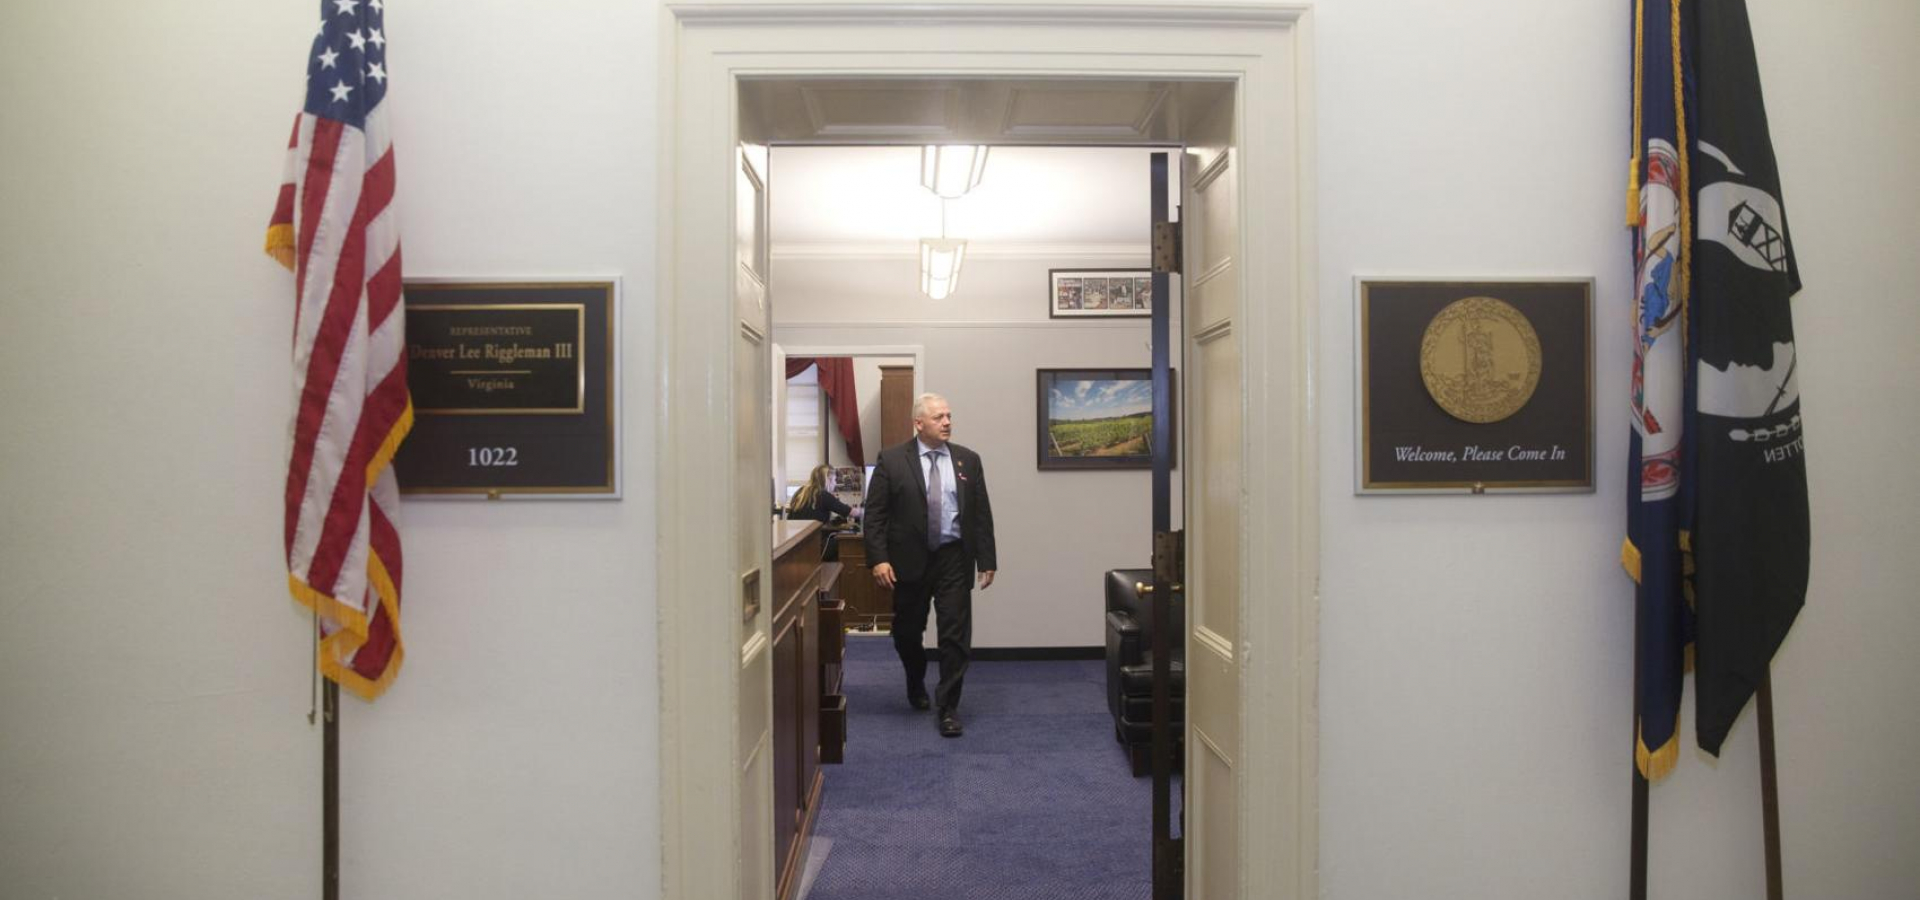 Rep. Riggleman in his office